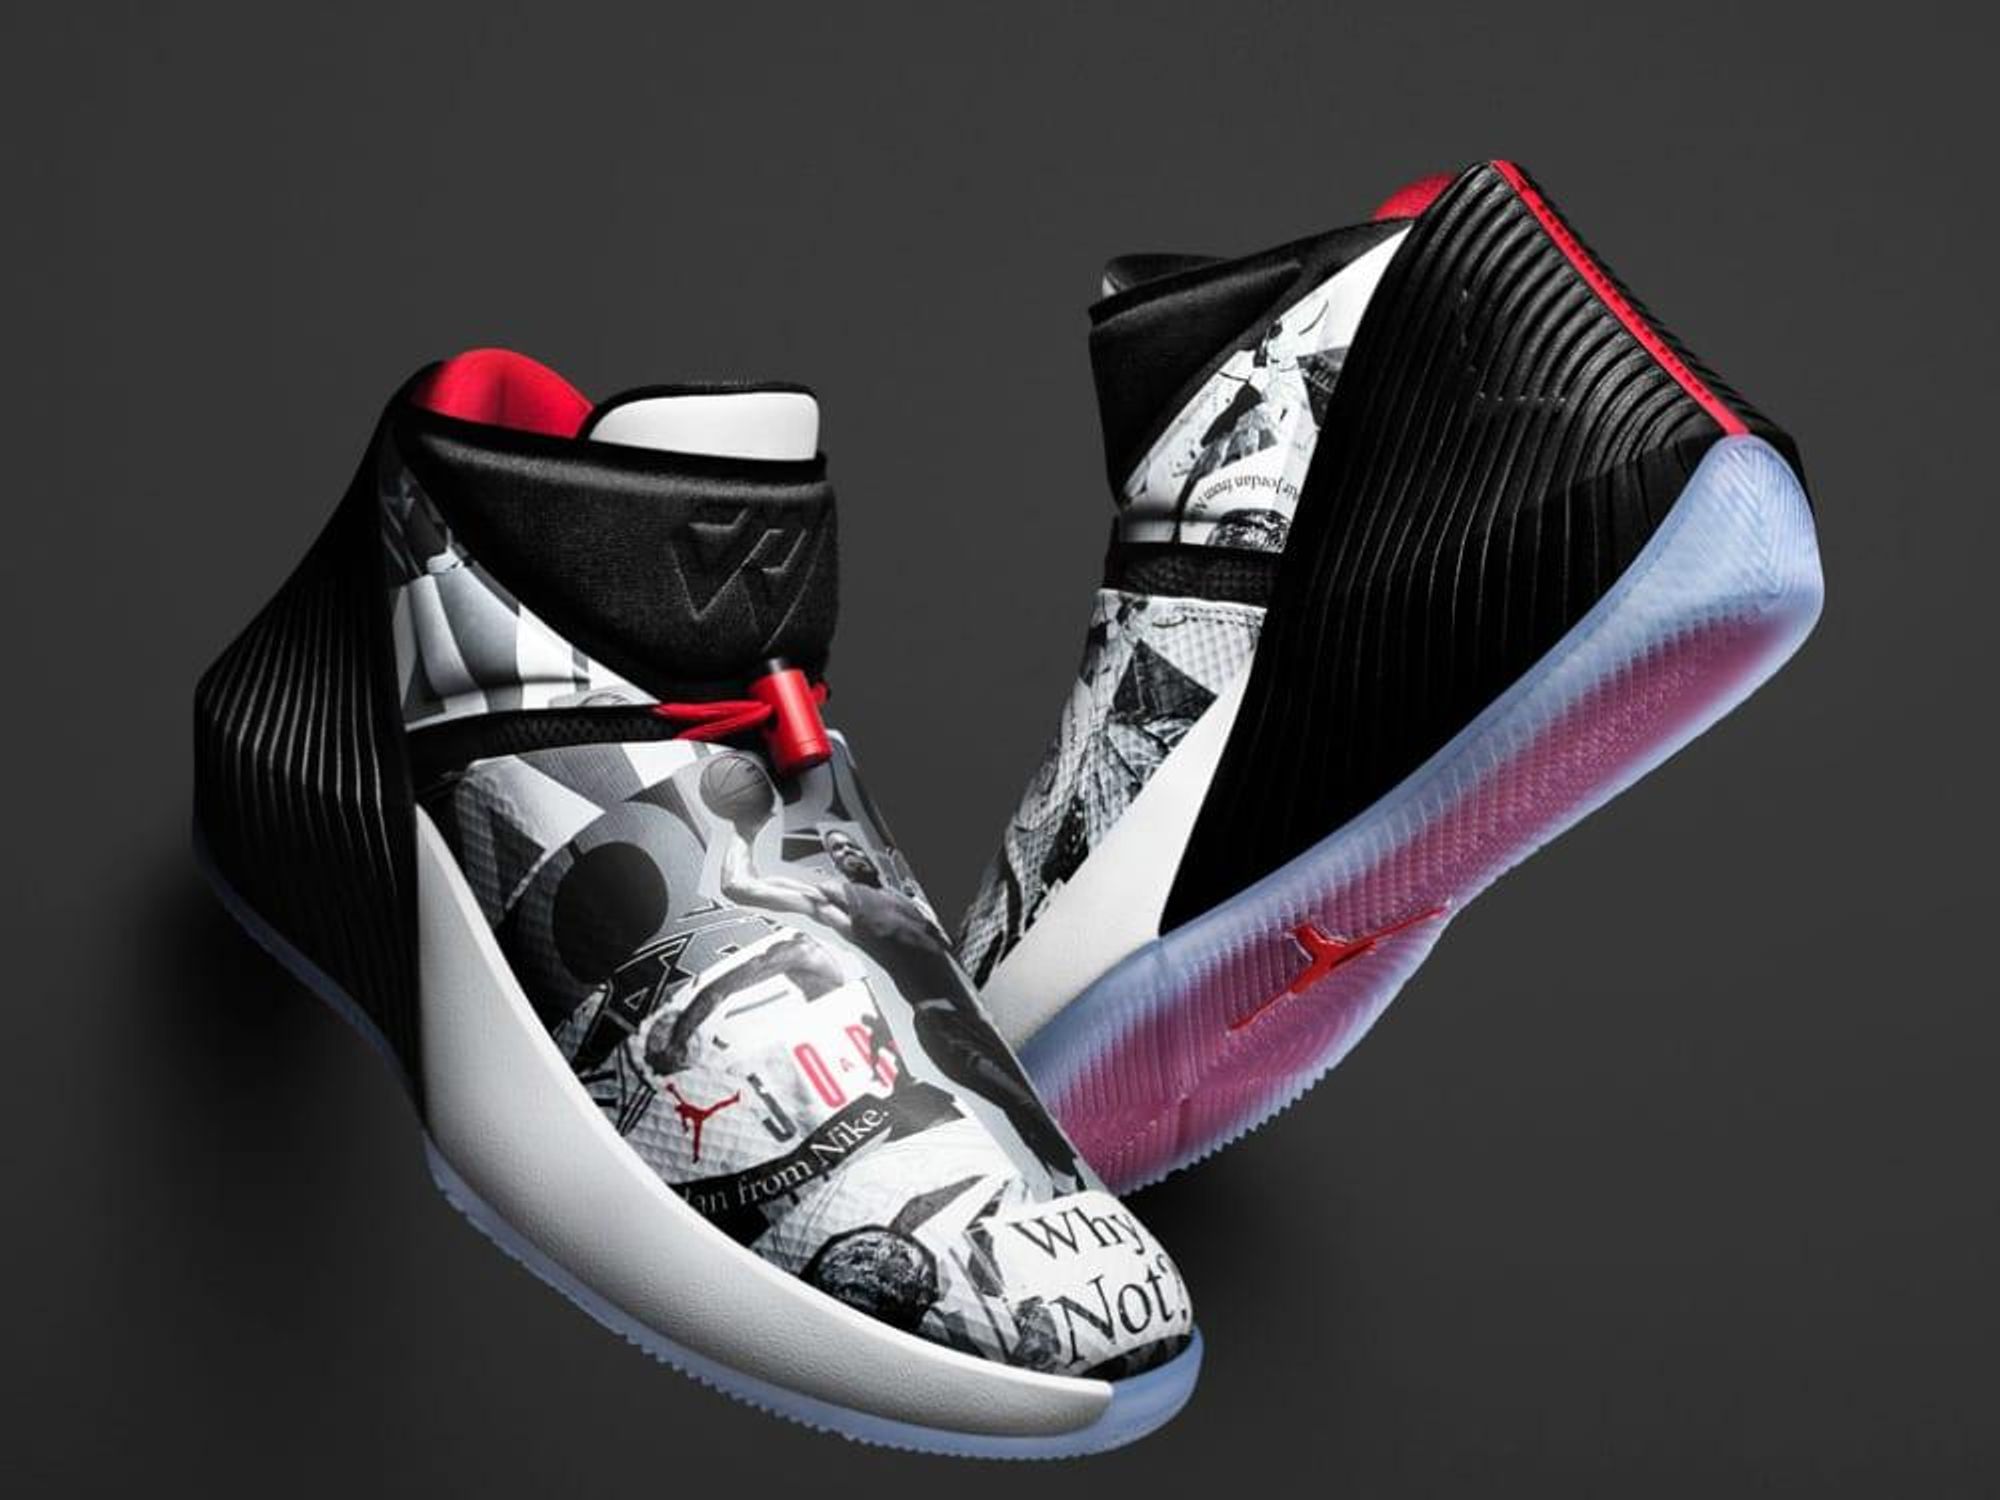 Russell Westbrook basketball shoes